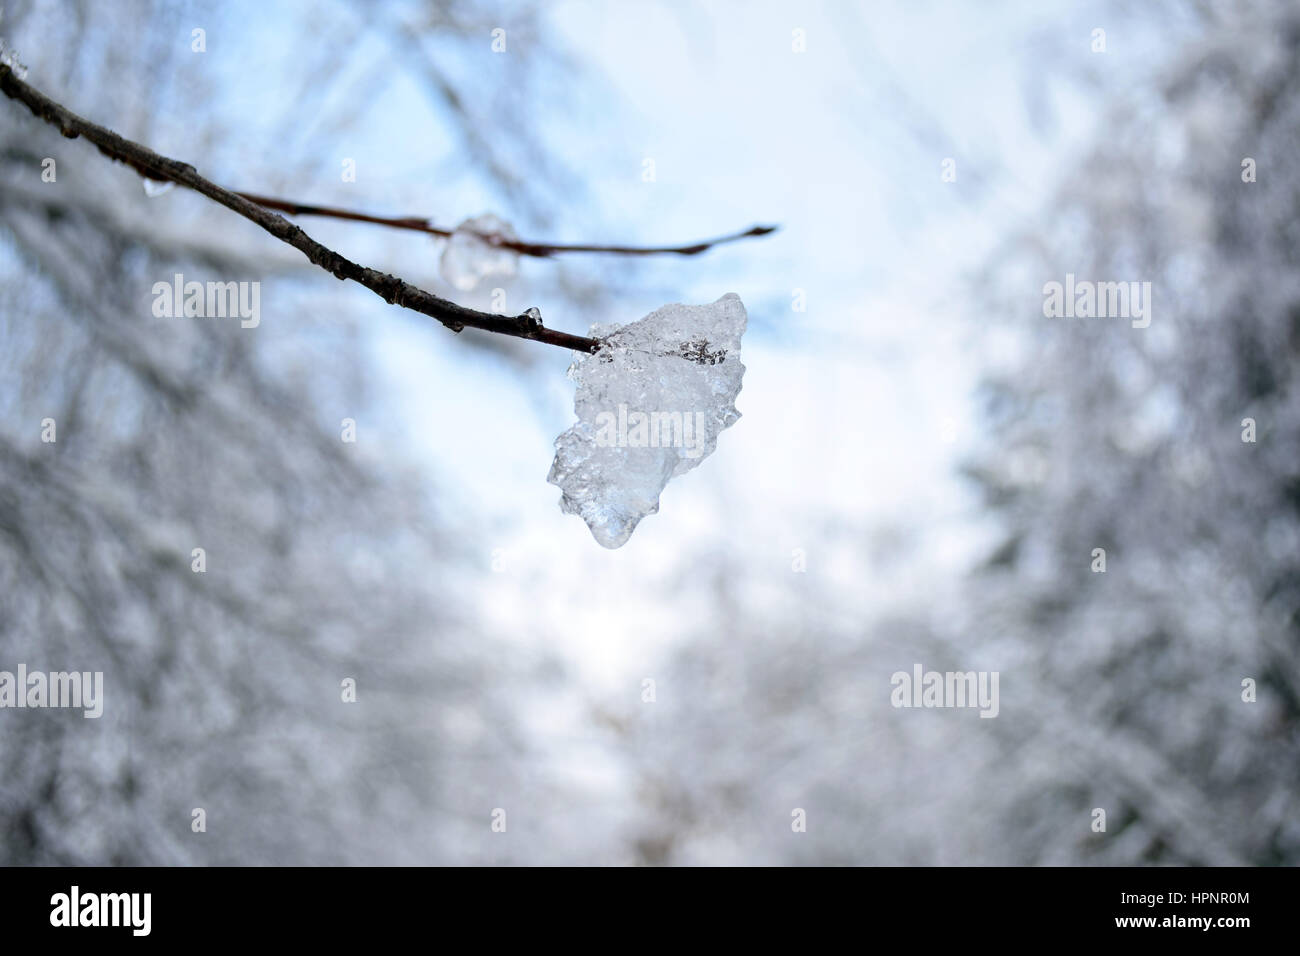 Iceball on a branch. Stock Photo